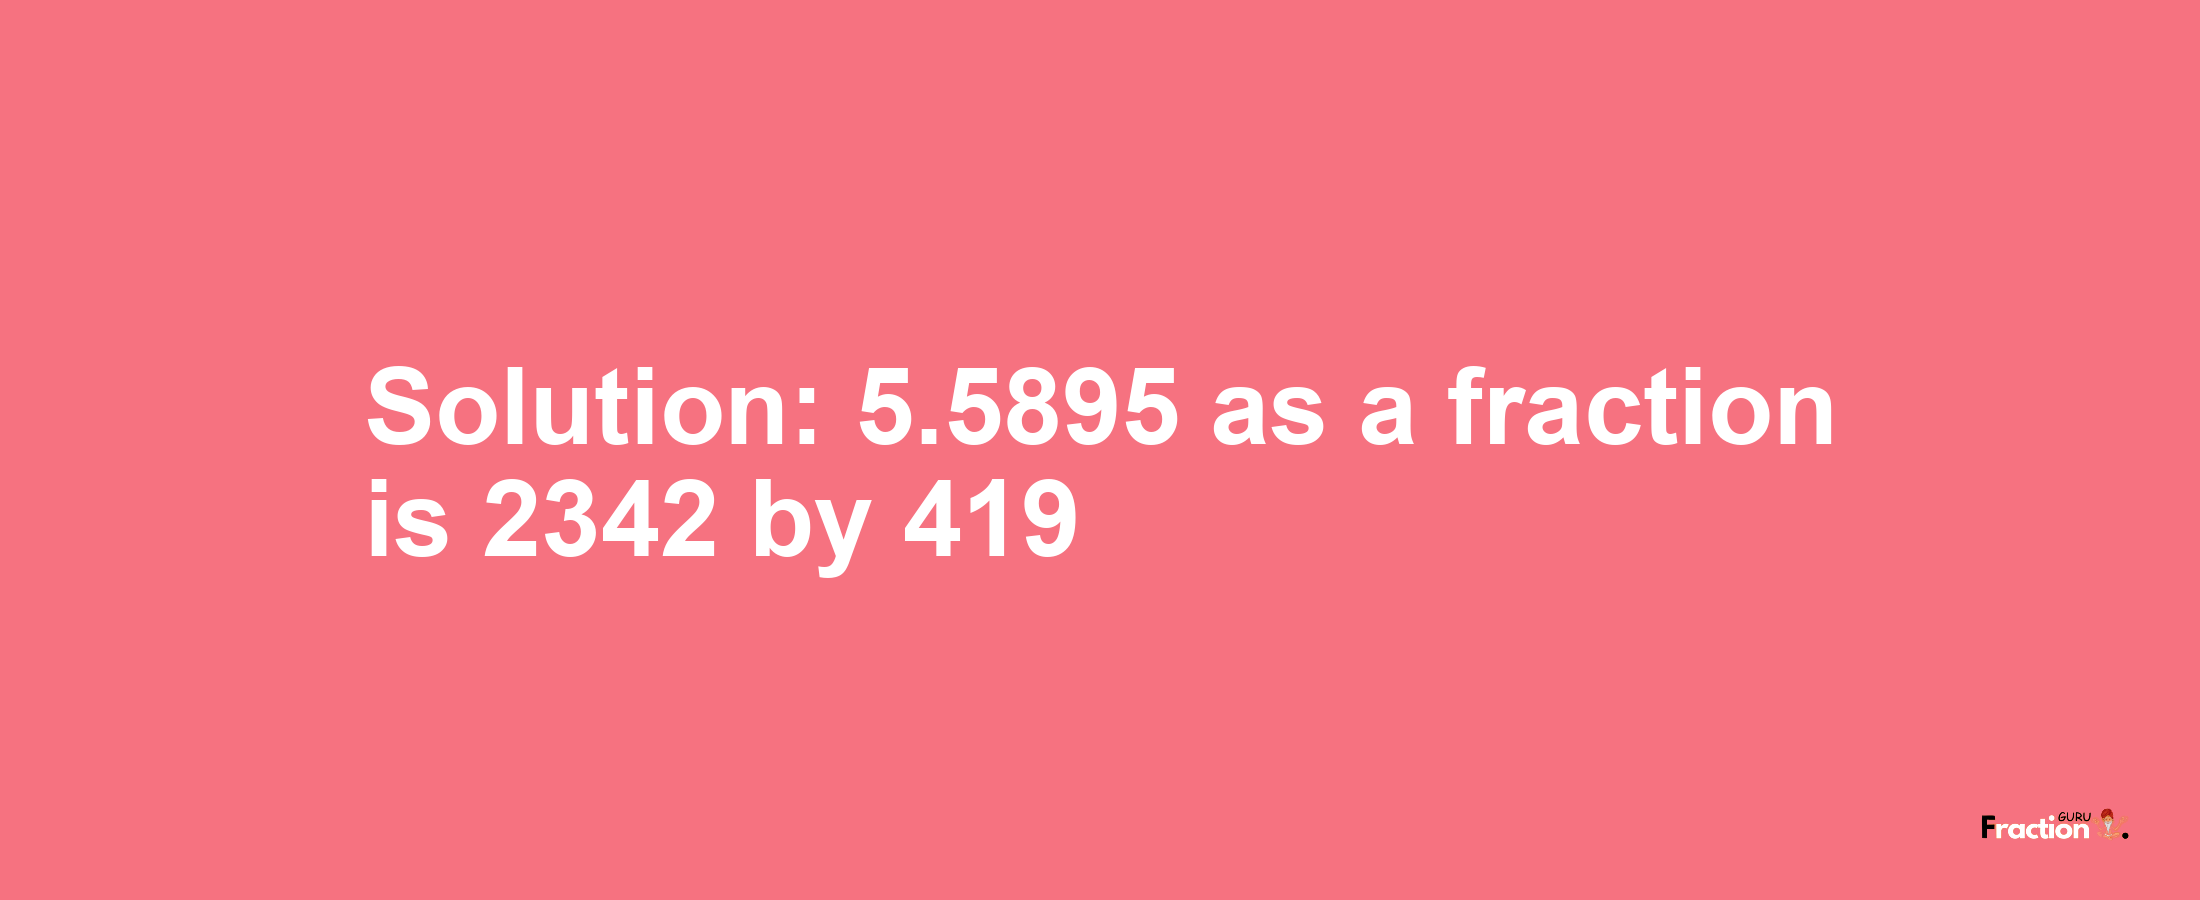 Solution:5.5895 as a fraction is 2342/419